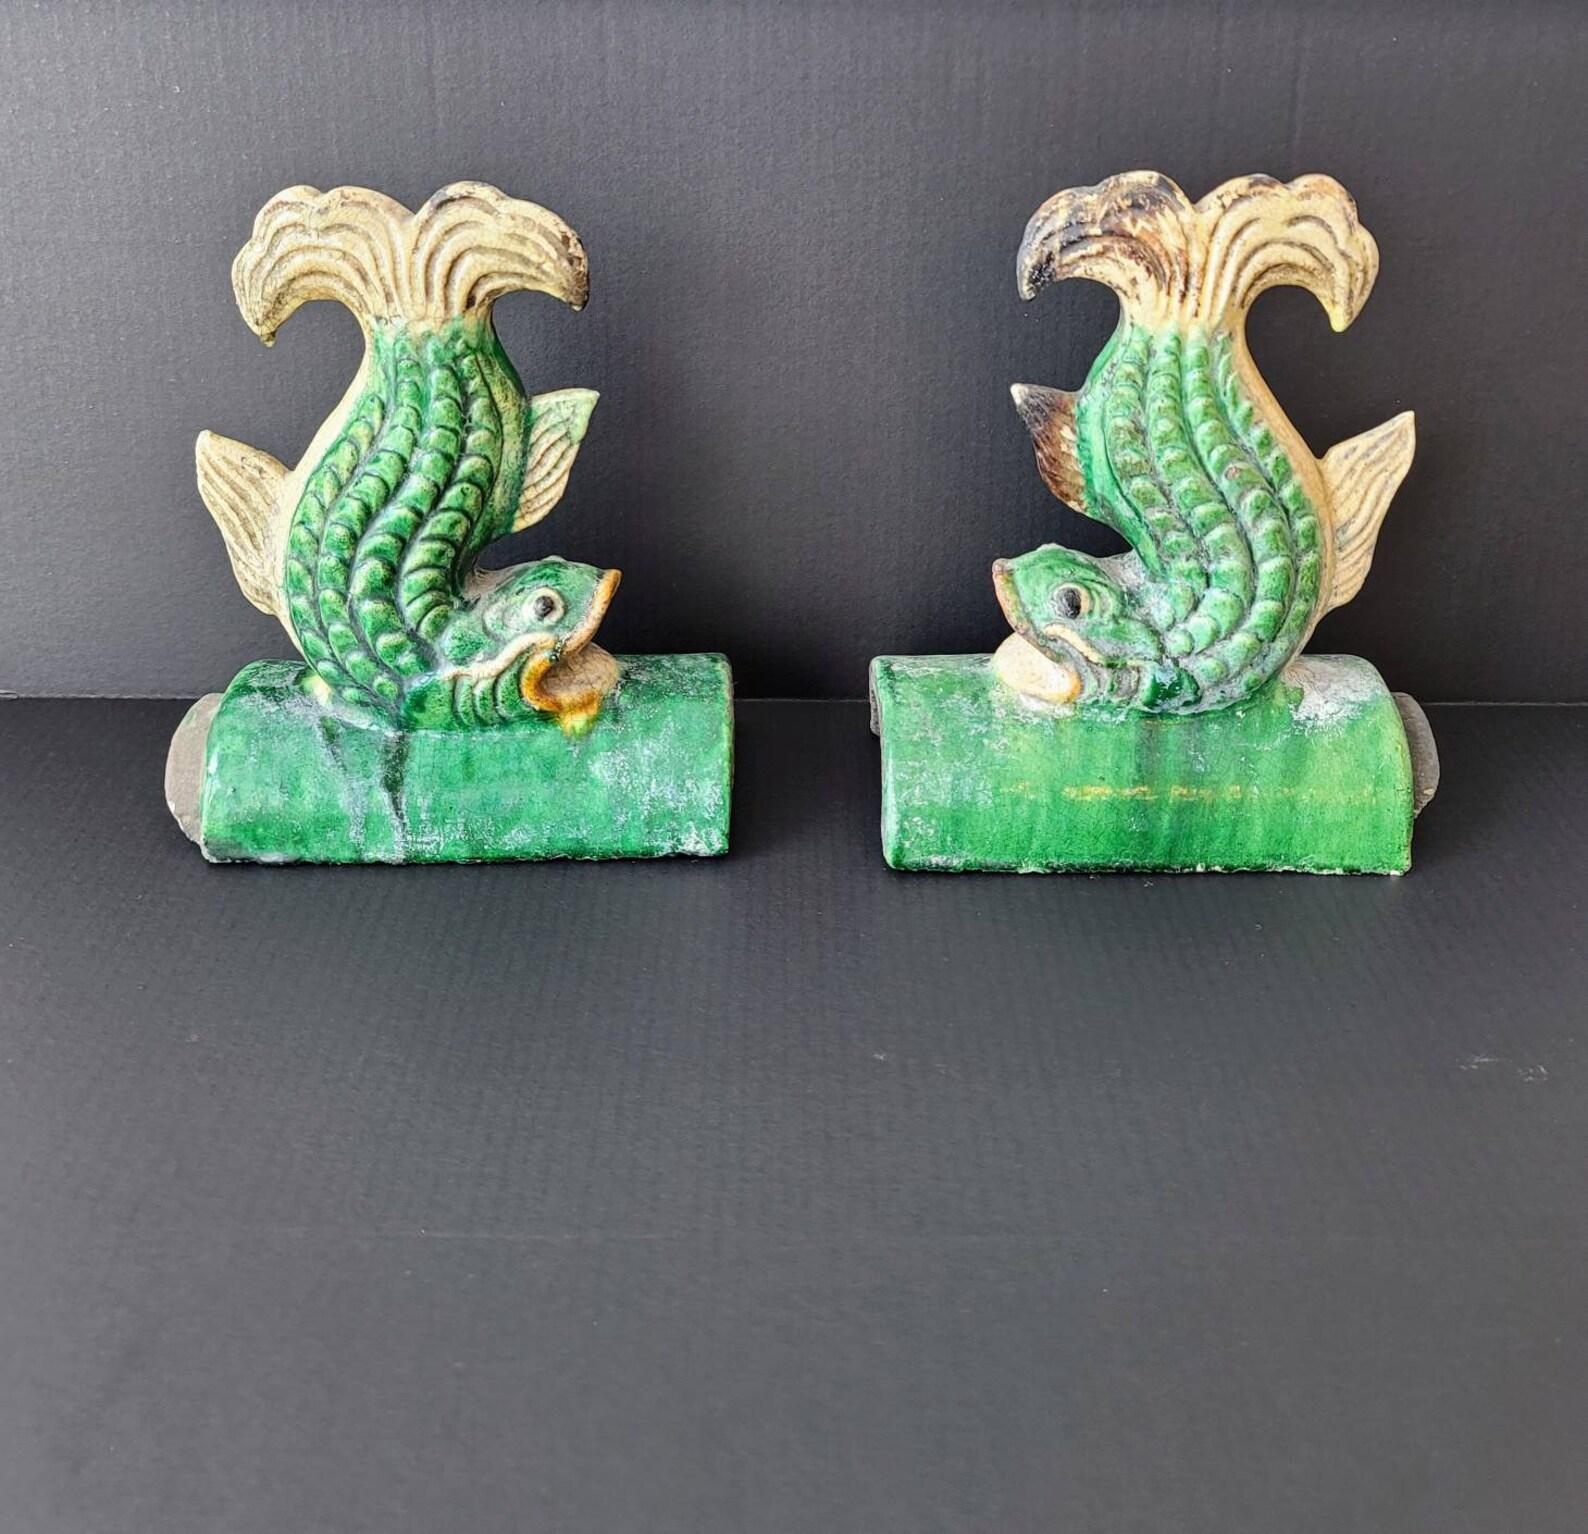 A pair of Qing dynasty (1636–1912) Sancai glazed ceramic figural roof tiles with rich beautifully aged patina!

Dating to the 19th century, wonderfully hand-crafted and painted, sculptural form depicting stylized fish, rising on terracotta clay